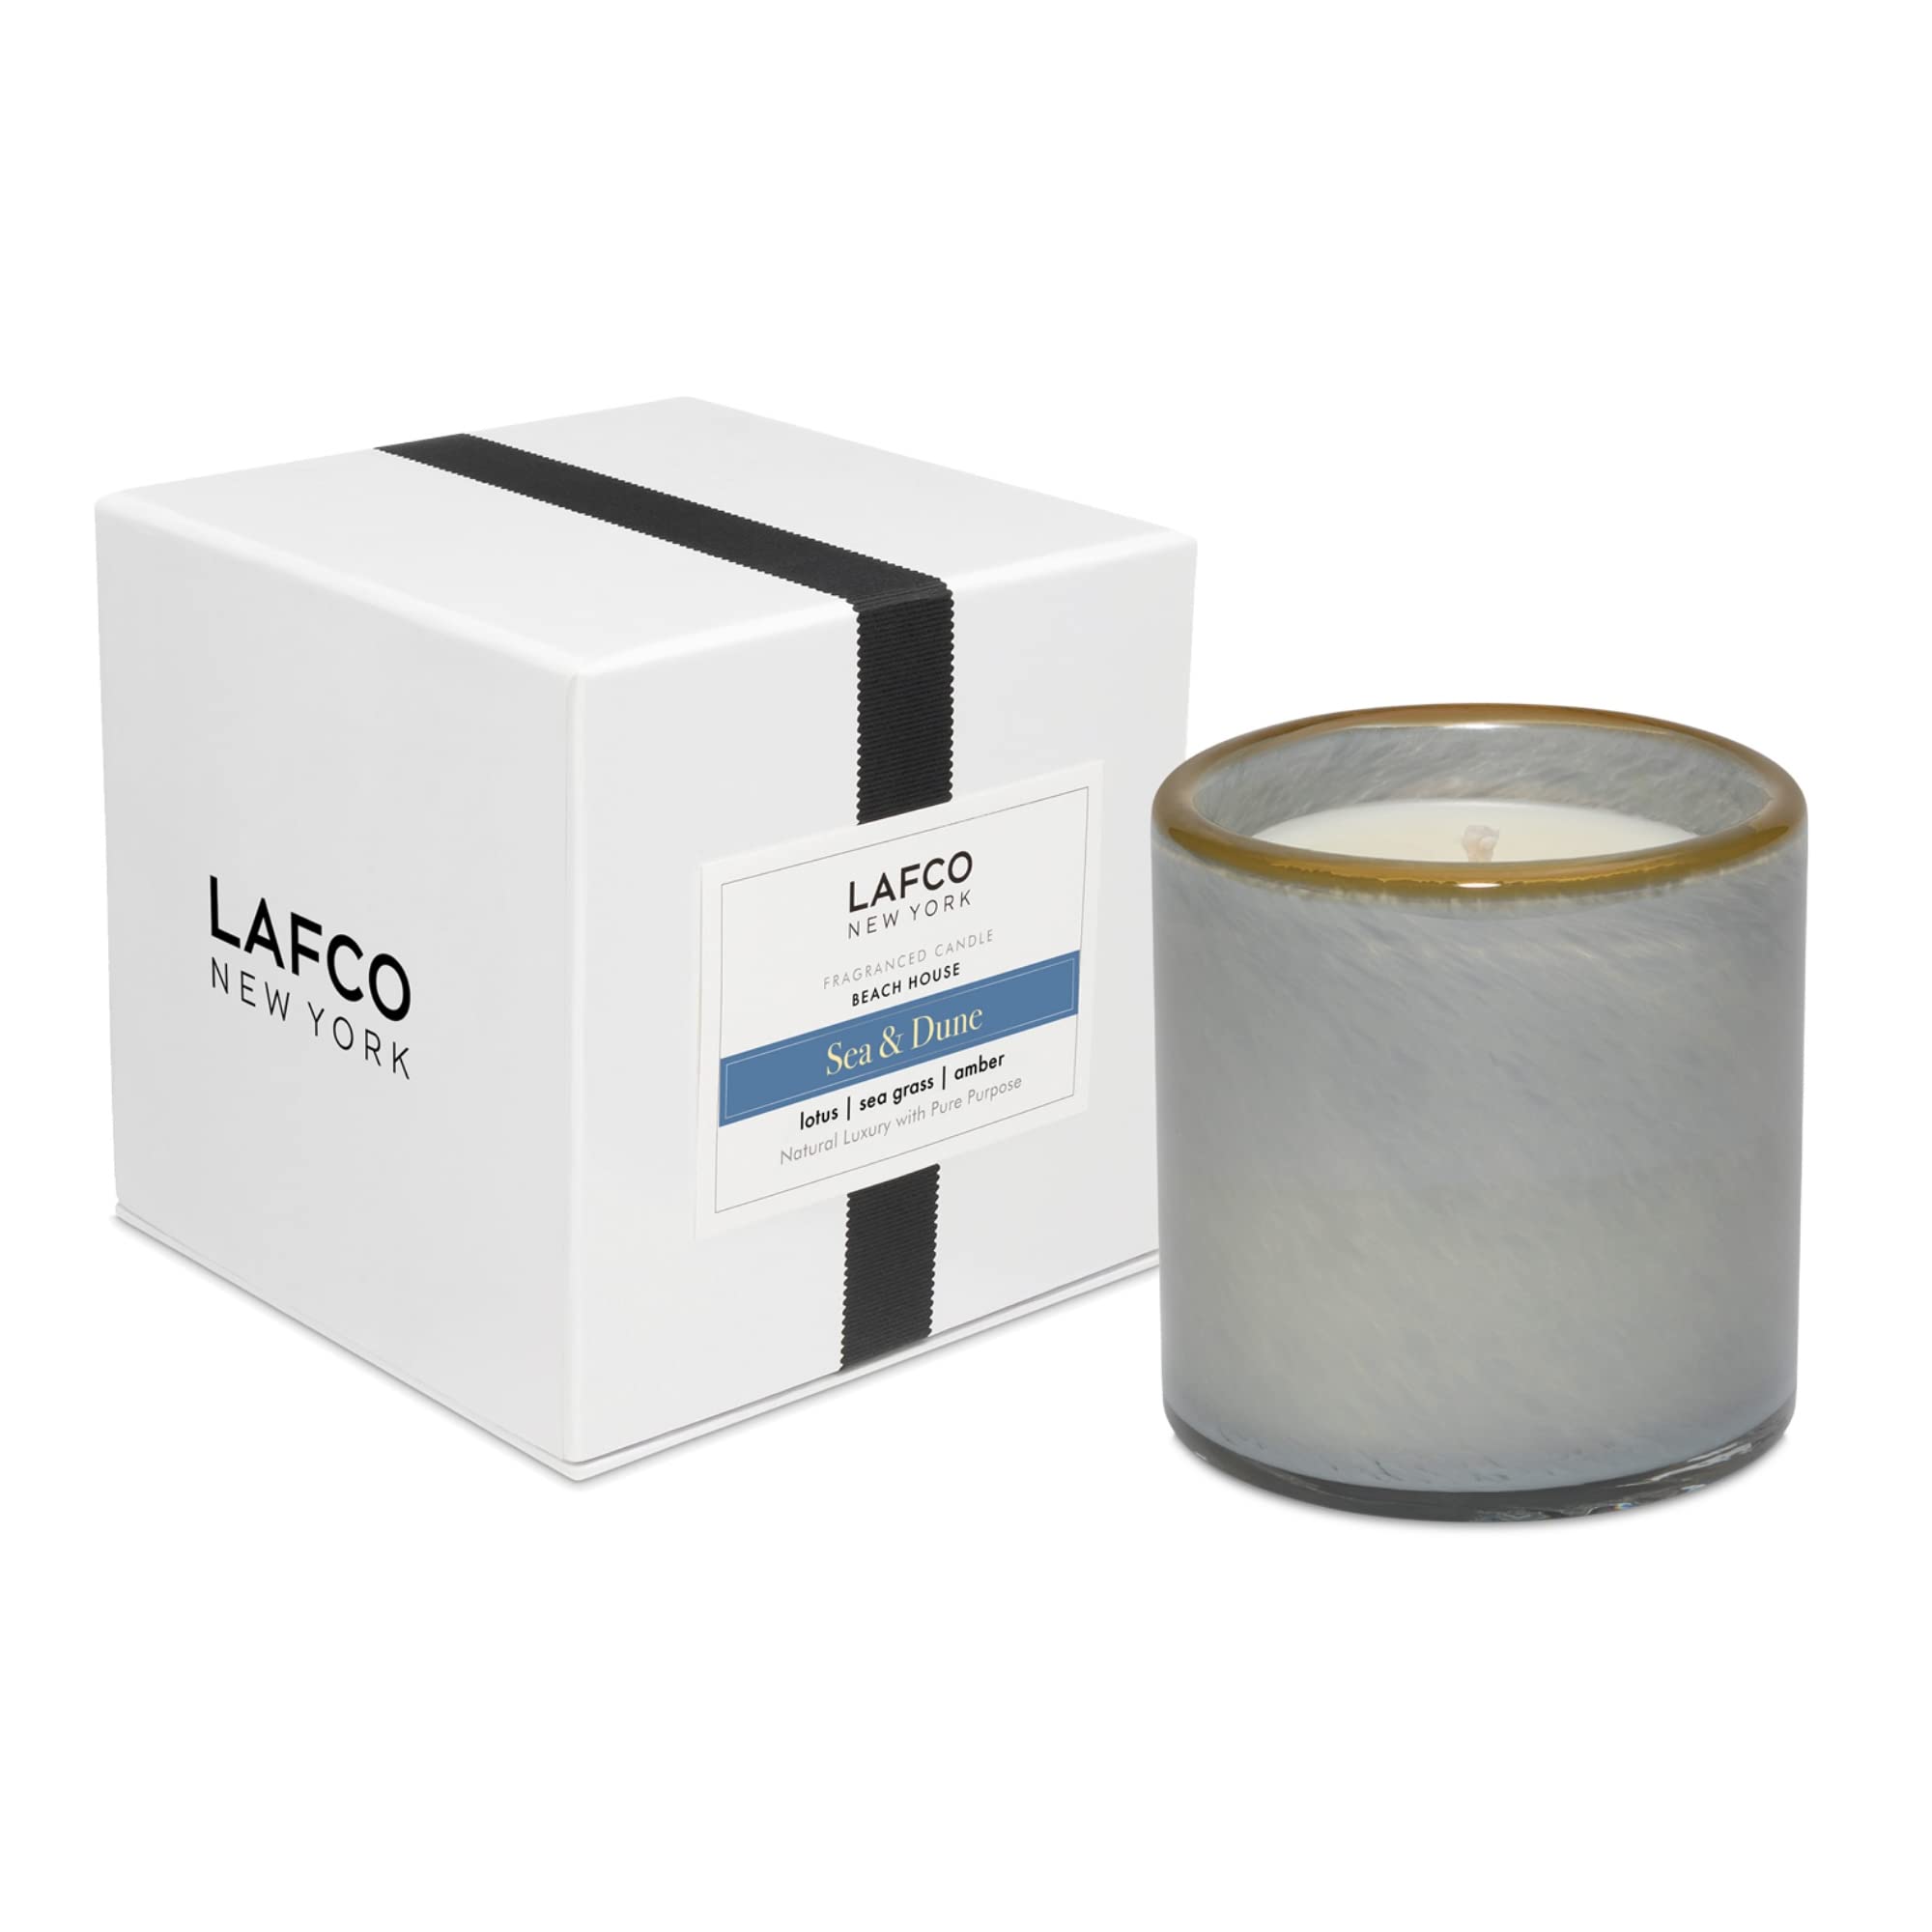 LAFCO New York Classic Candle, Sea & Dune - 6.5 oz - 50-Hour Burn Time - Reusable, Hand Blown Glass Vessel - Made in The USA